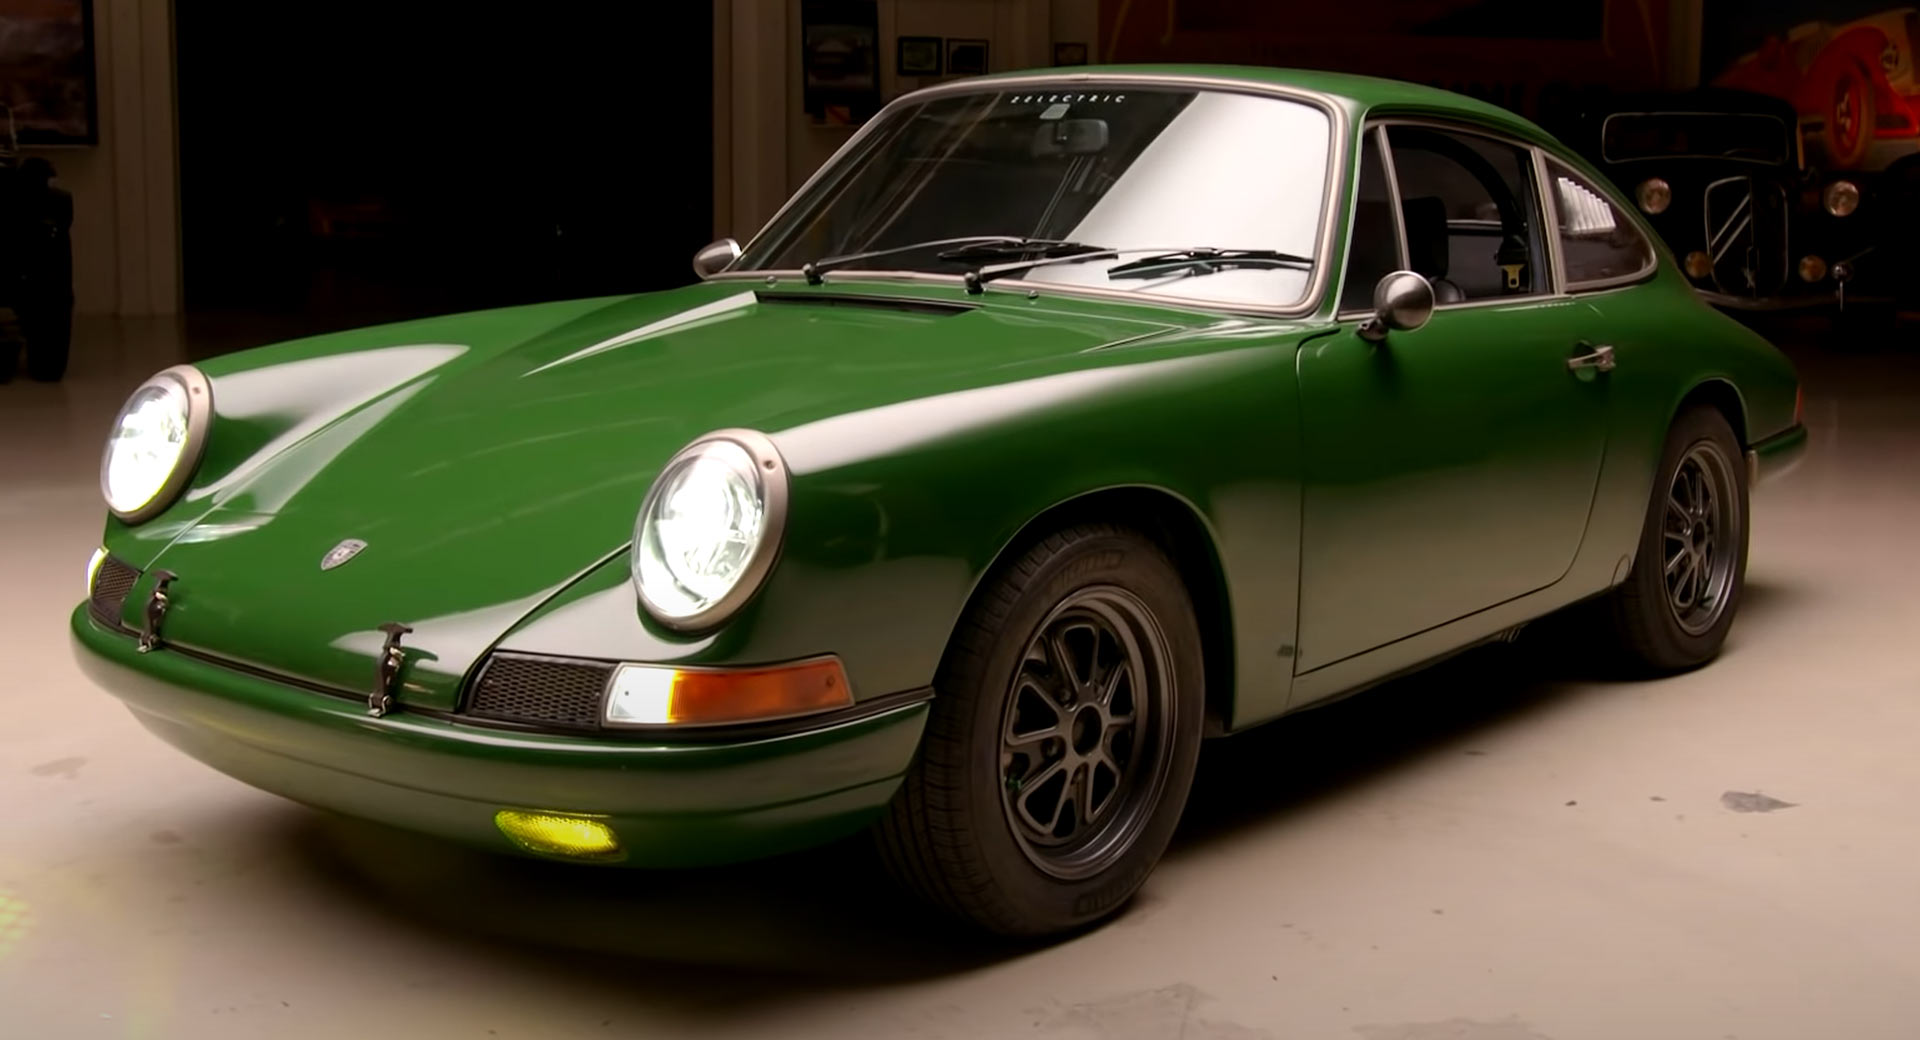 What Does Jay Leno Think Of An Electric 1968 Porsche 912 With 536 HP? Auto Recent